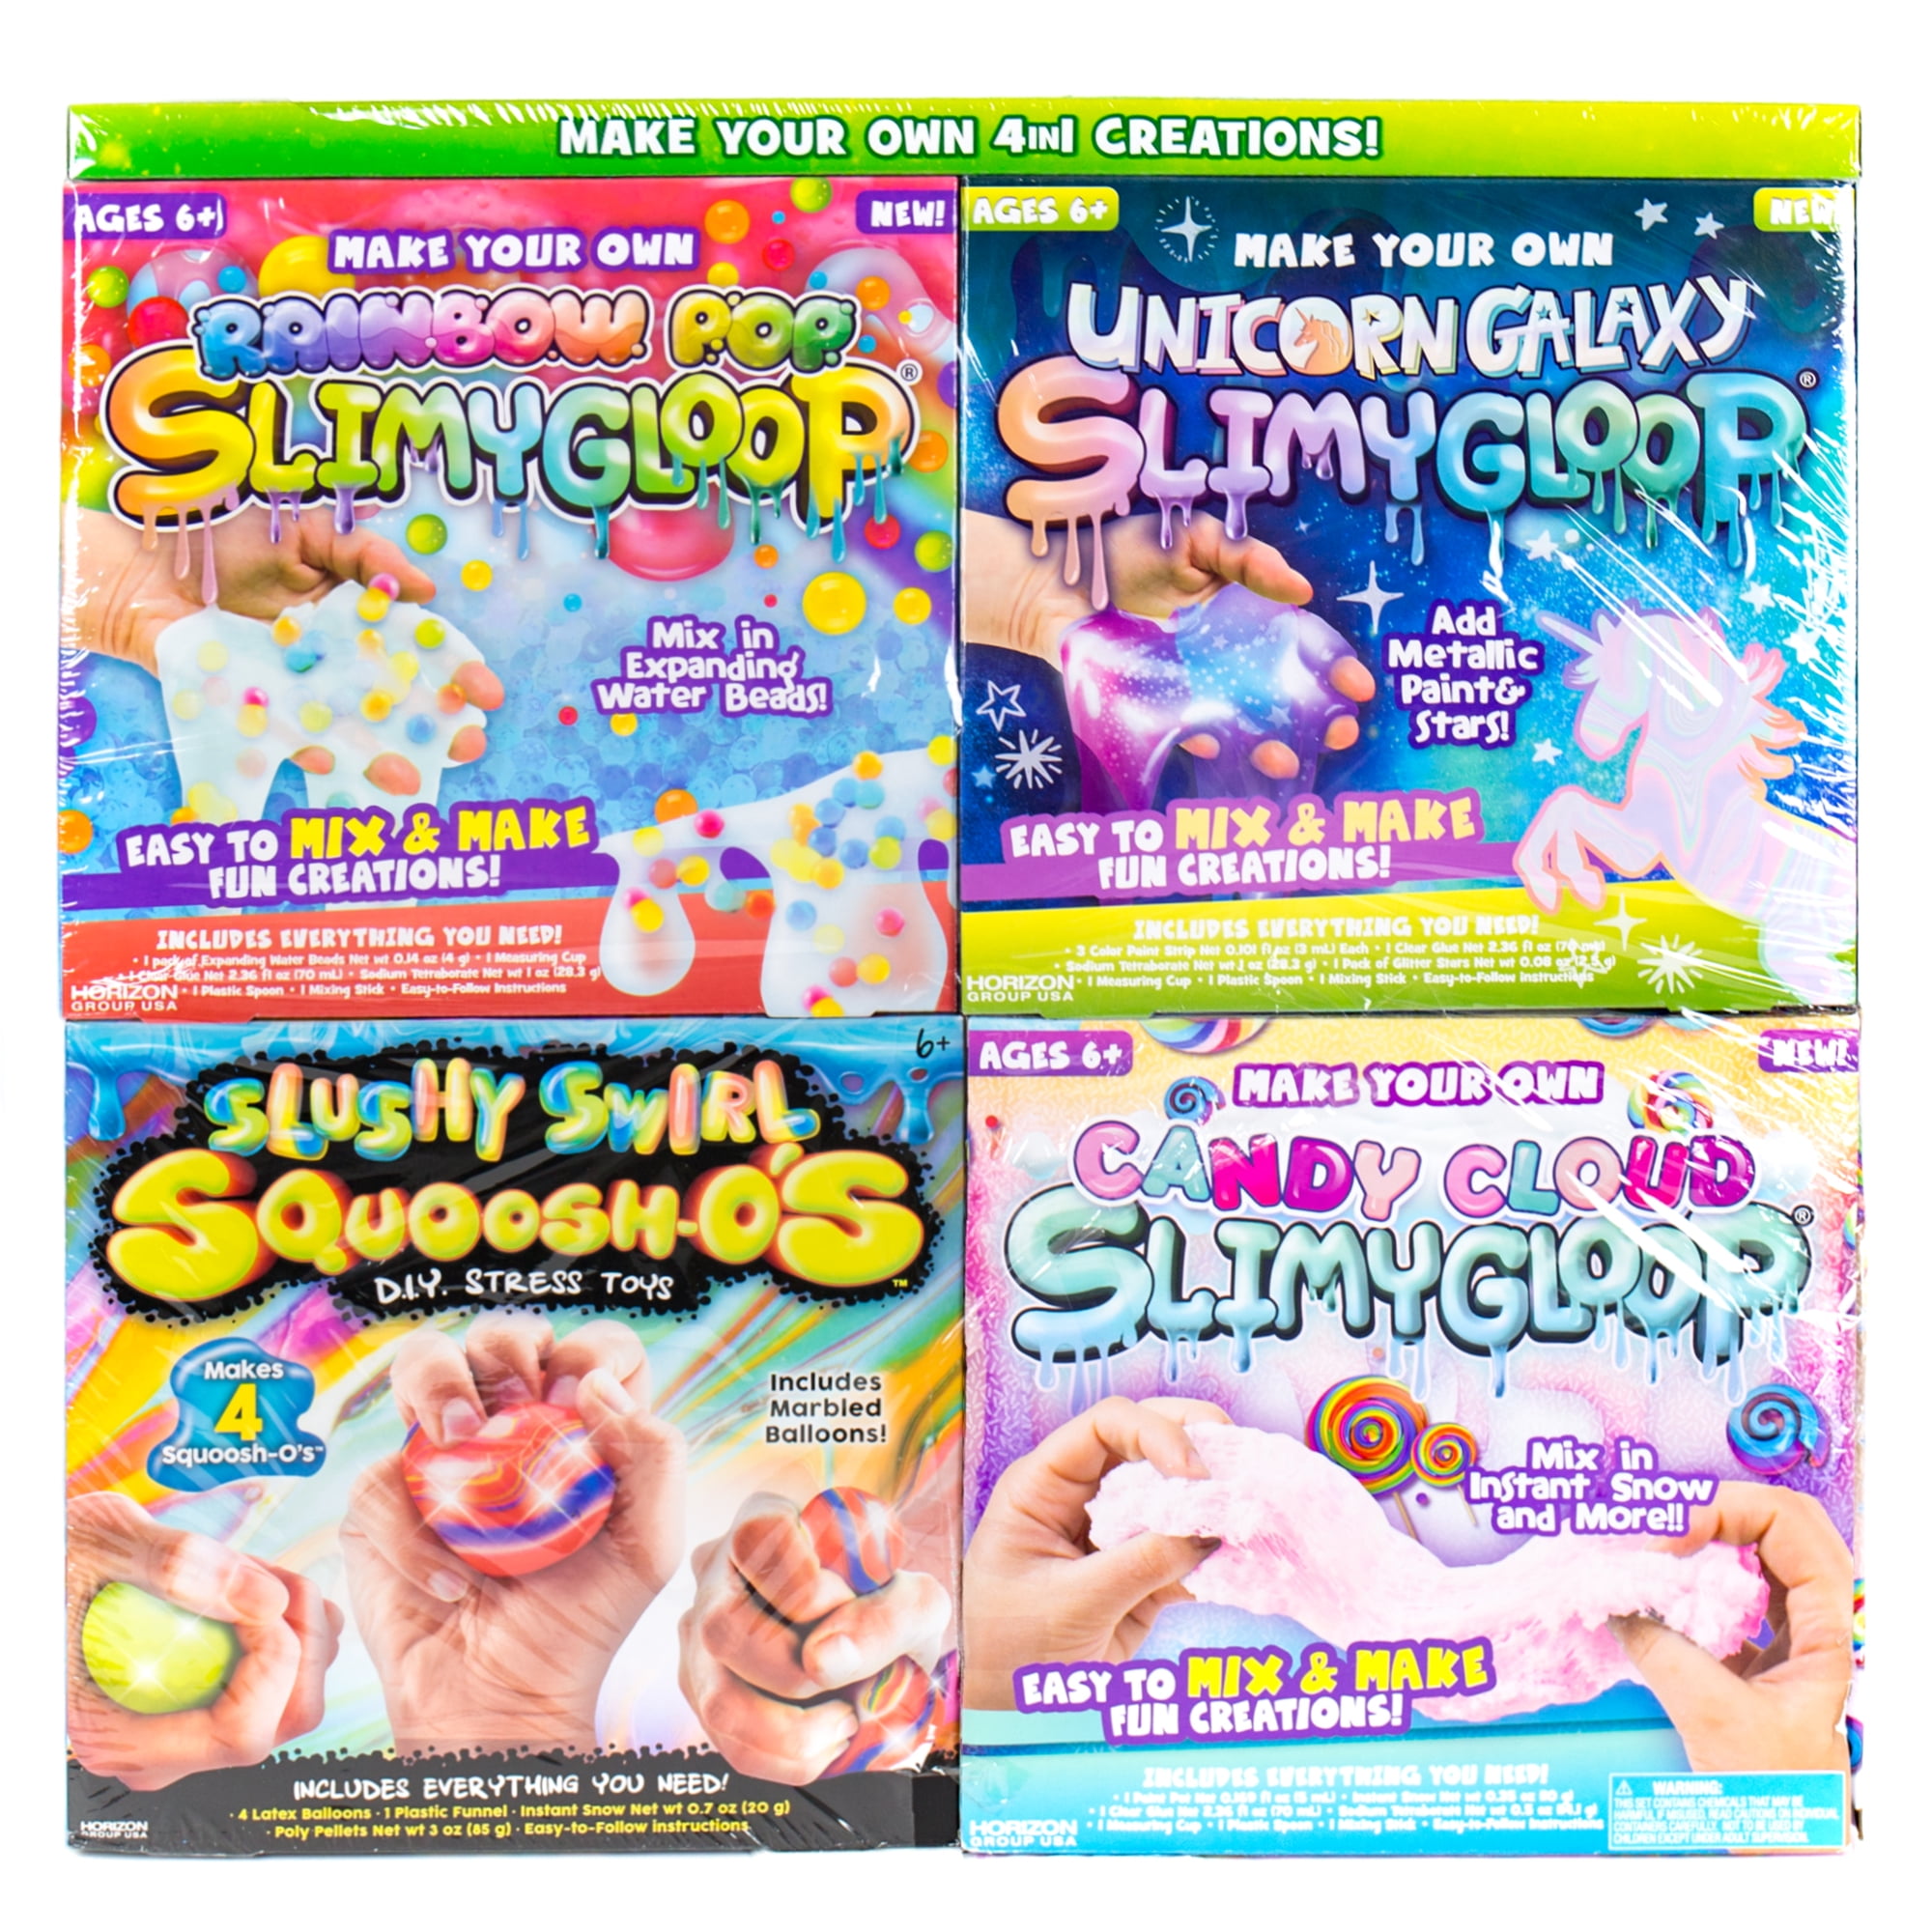 SLIMYGLOOP Make Your Own Cookie Butter DIY SLIME KIT,NEW Fast Shipping 